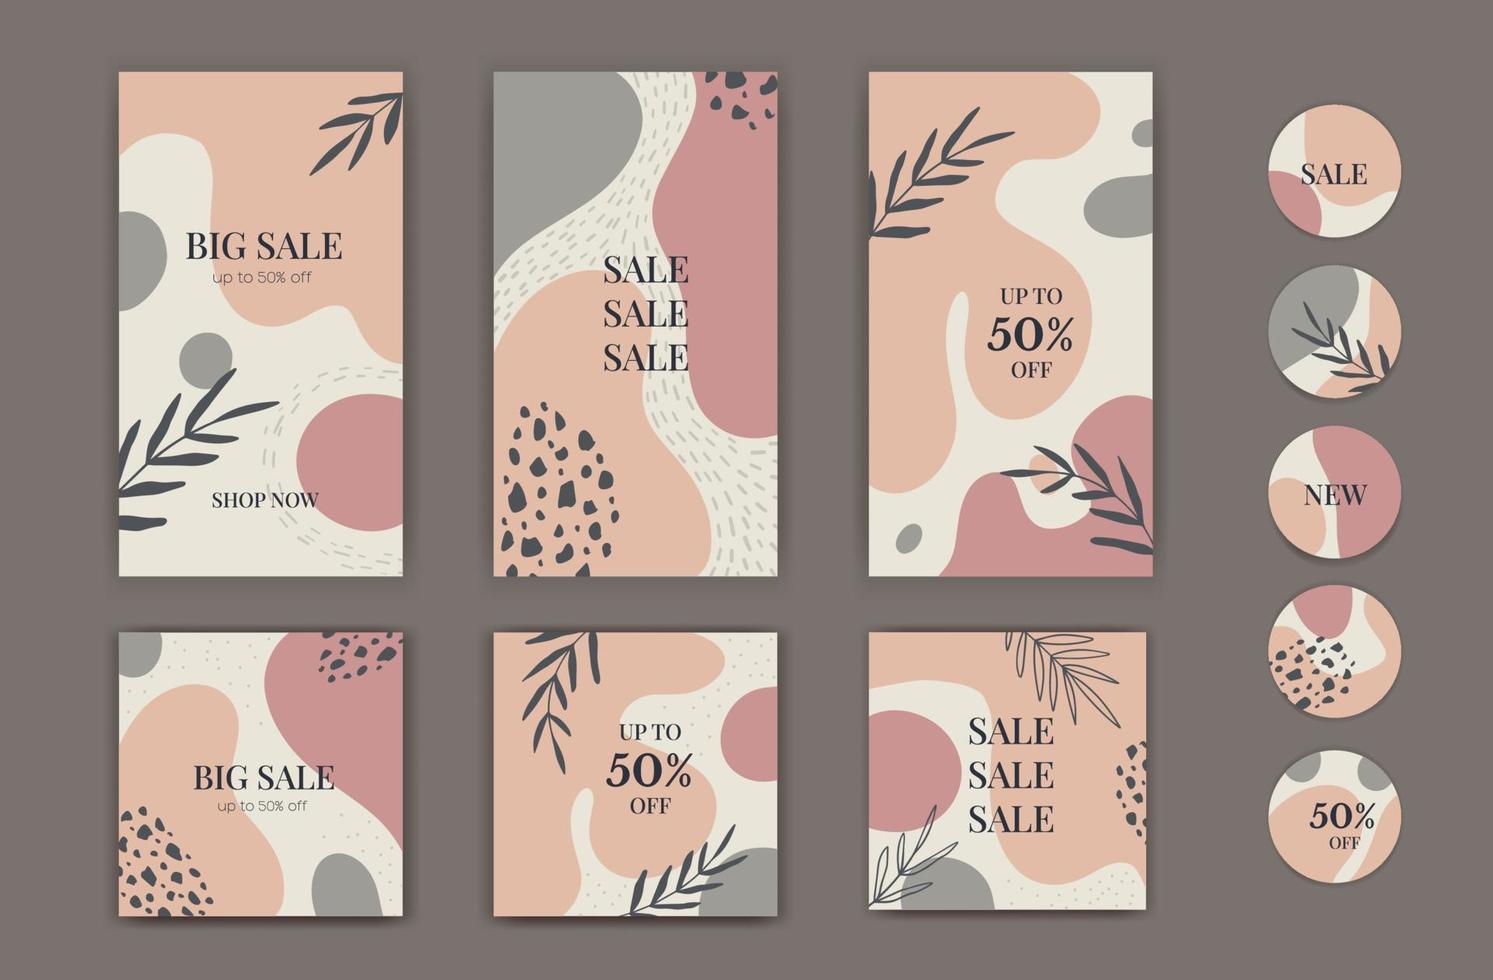 Big Set of sale post social media pack template premium vector, organic design in pastel colors. Stylish social media posts, story and highlights. Editable templates with space for text vector